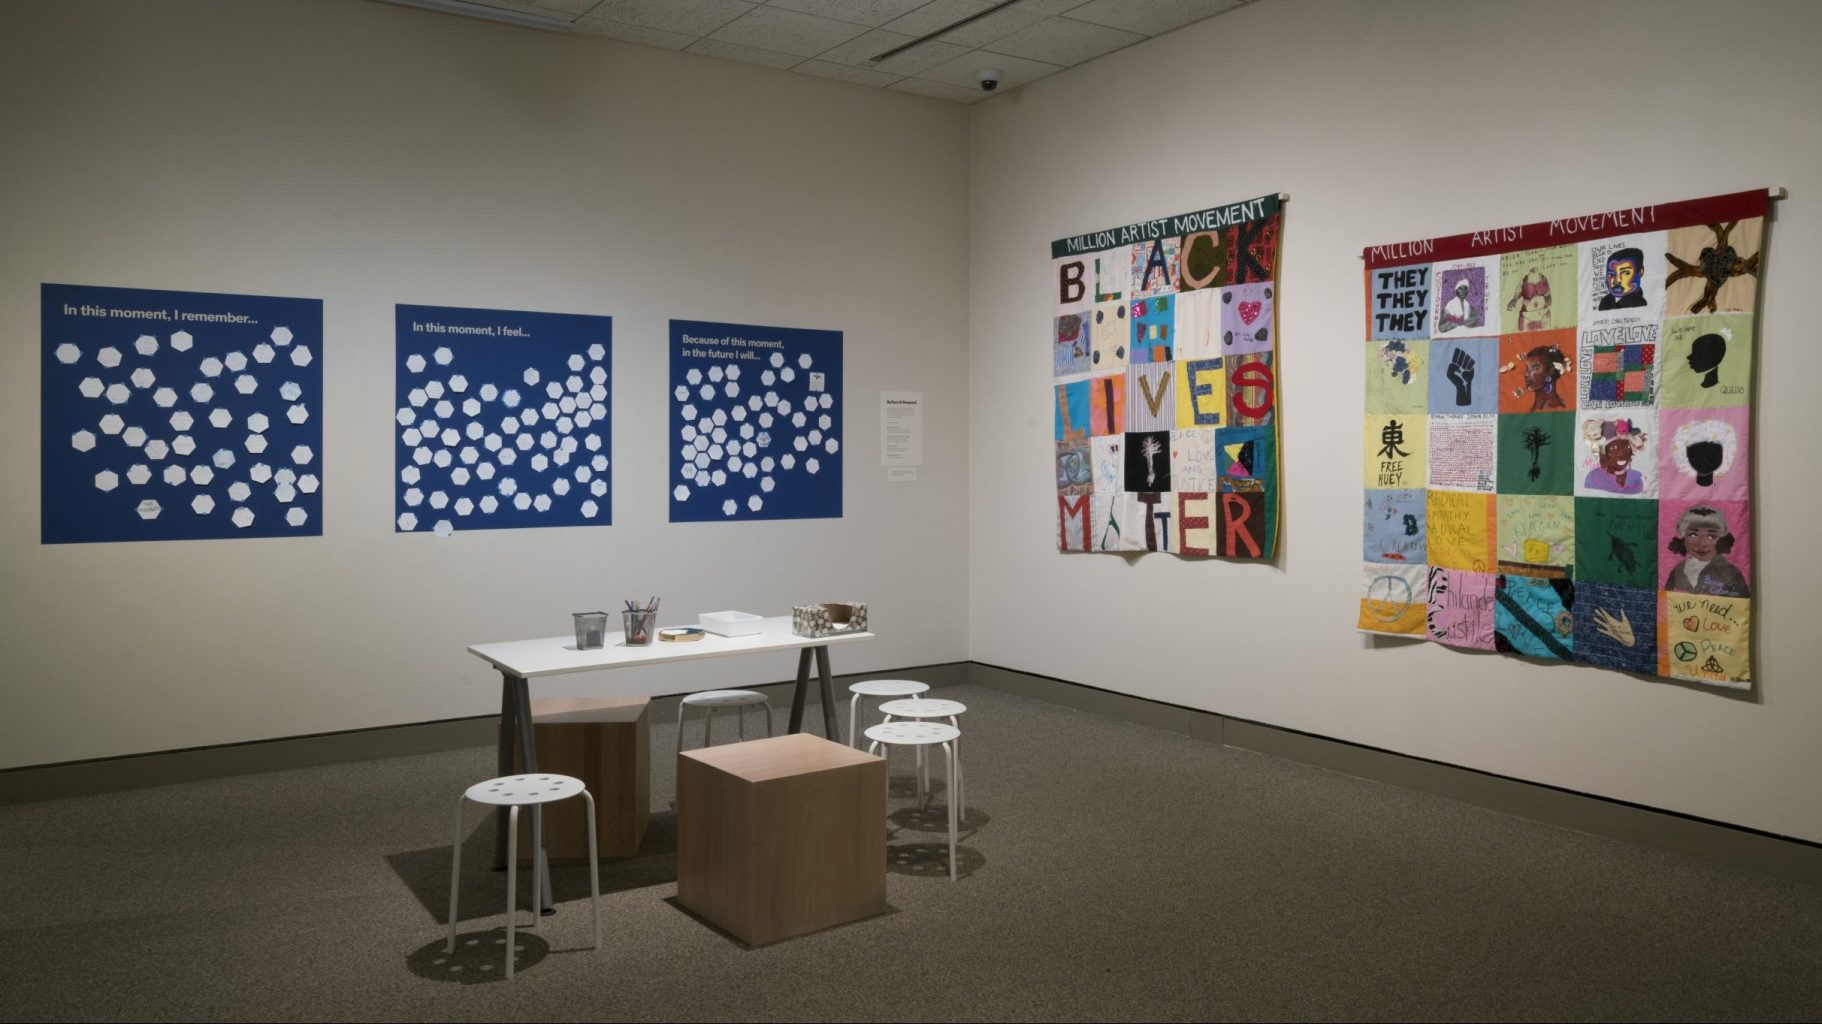 A museum gallery space with Black-Lives-Matter-themed art and a workstation for answering questions on poster boards: "In this moment, I remember...," "In this moment, I feel...," and "Because of this moment, in the future I will..."